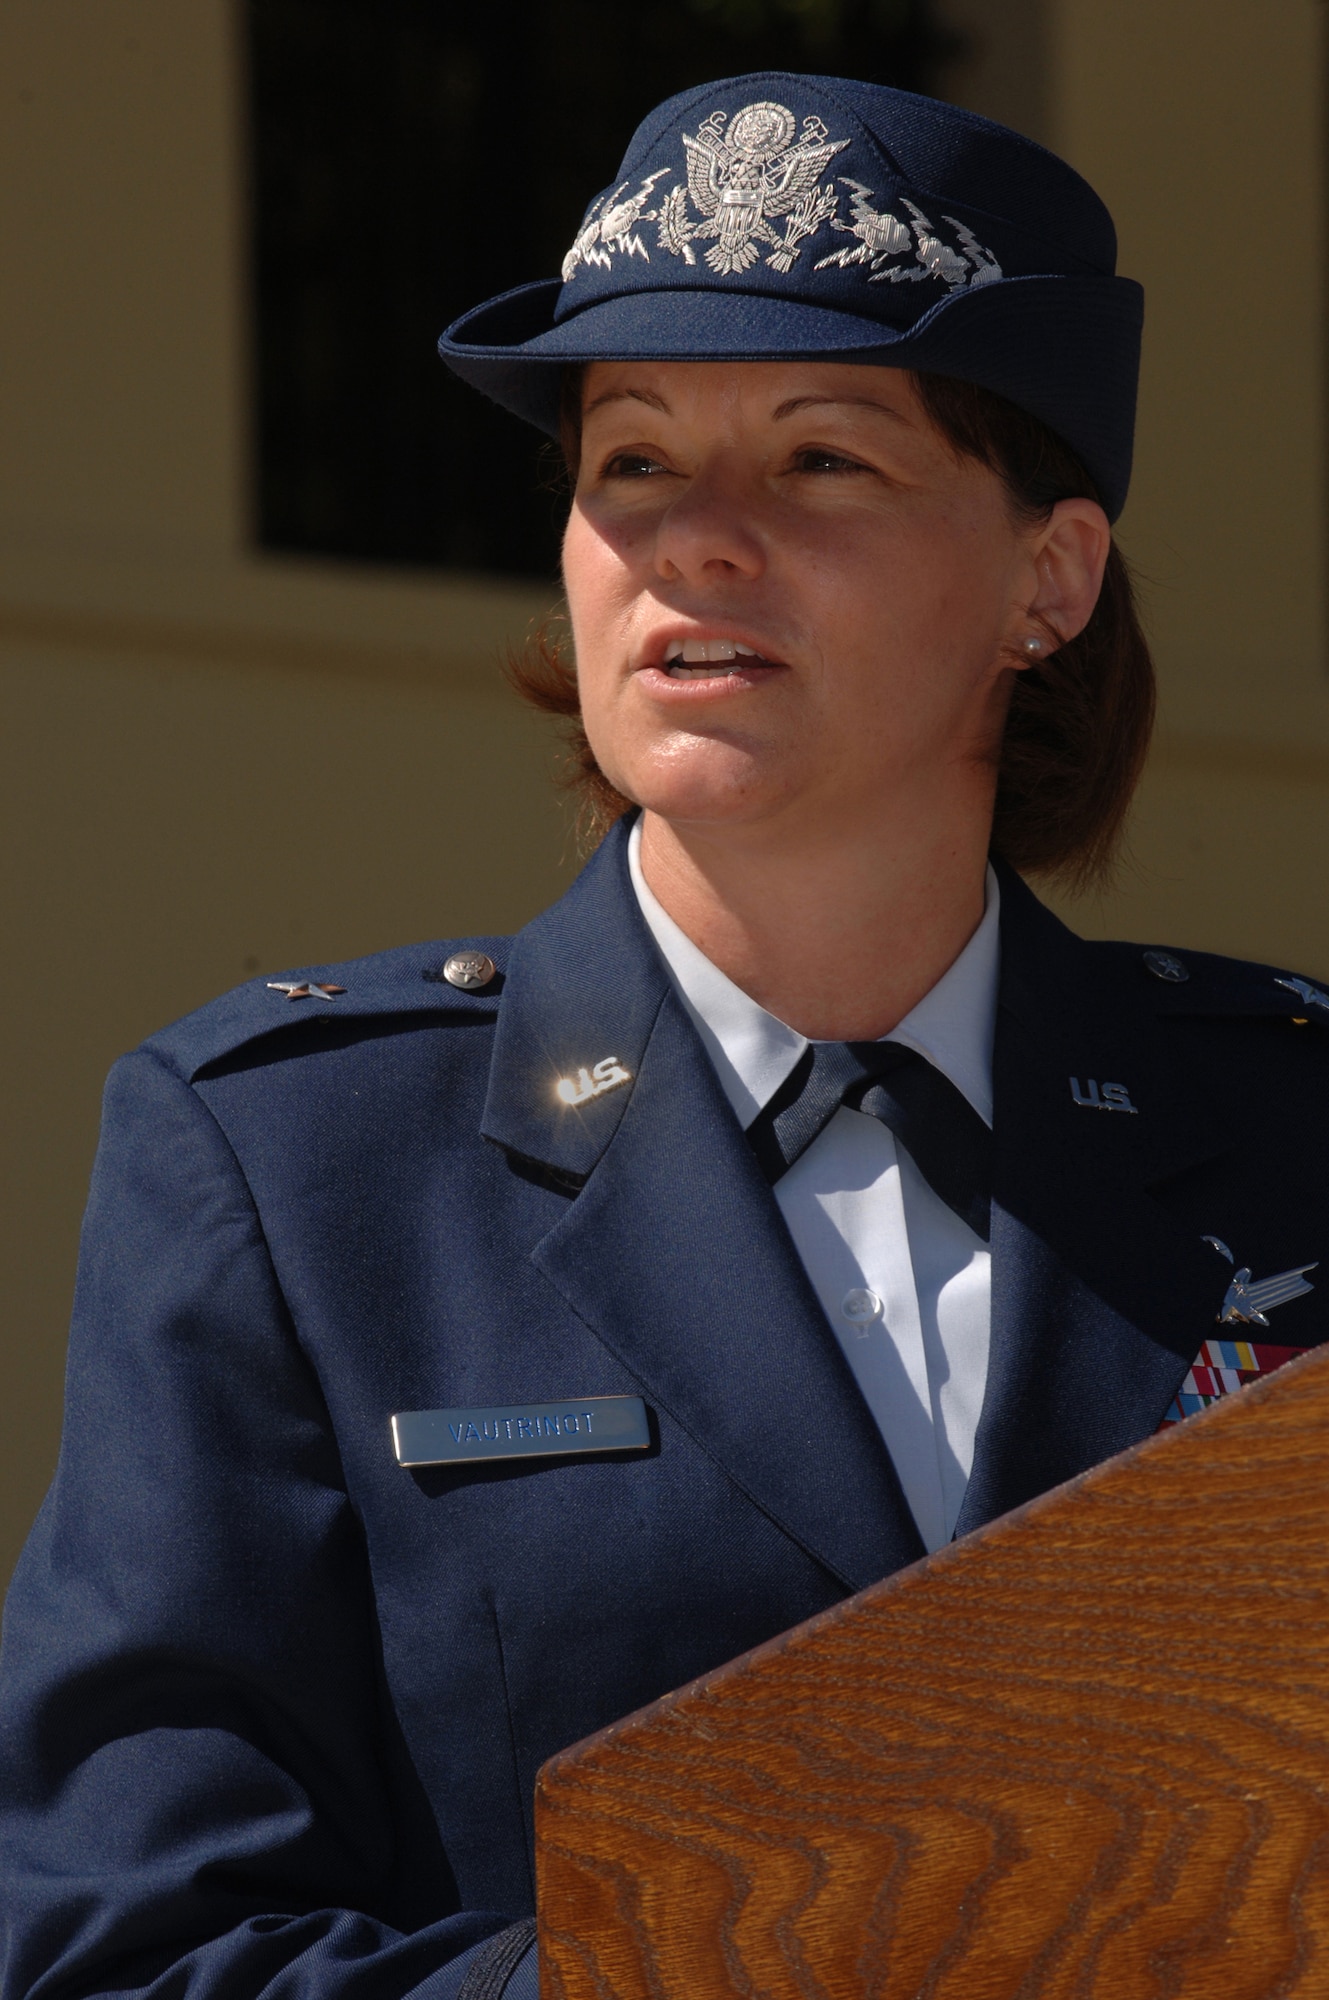 RANDOLPH AIR FORCE BASE, Texas (AETCNS) – Brig. Gen. Suzanne Vautrinot addresses the troops soon after assuming command of Air Force Recruiting Service during a change of command ceremony here July 17. (U.S. Air Force photo by Master Sgt. Scott F. Reed)